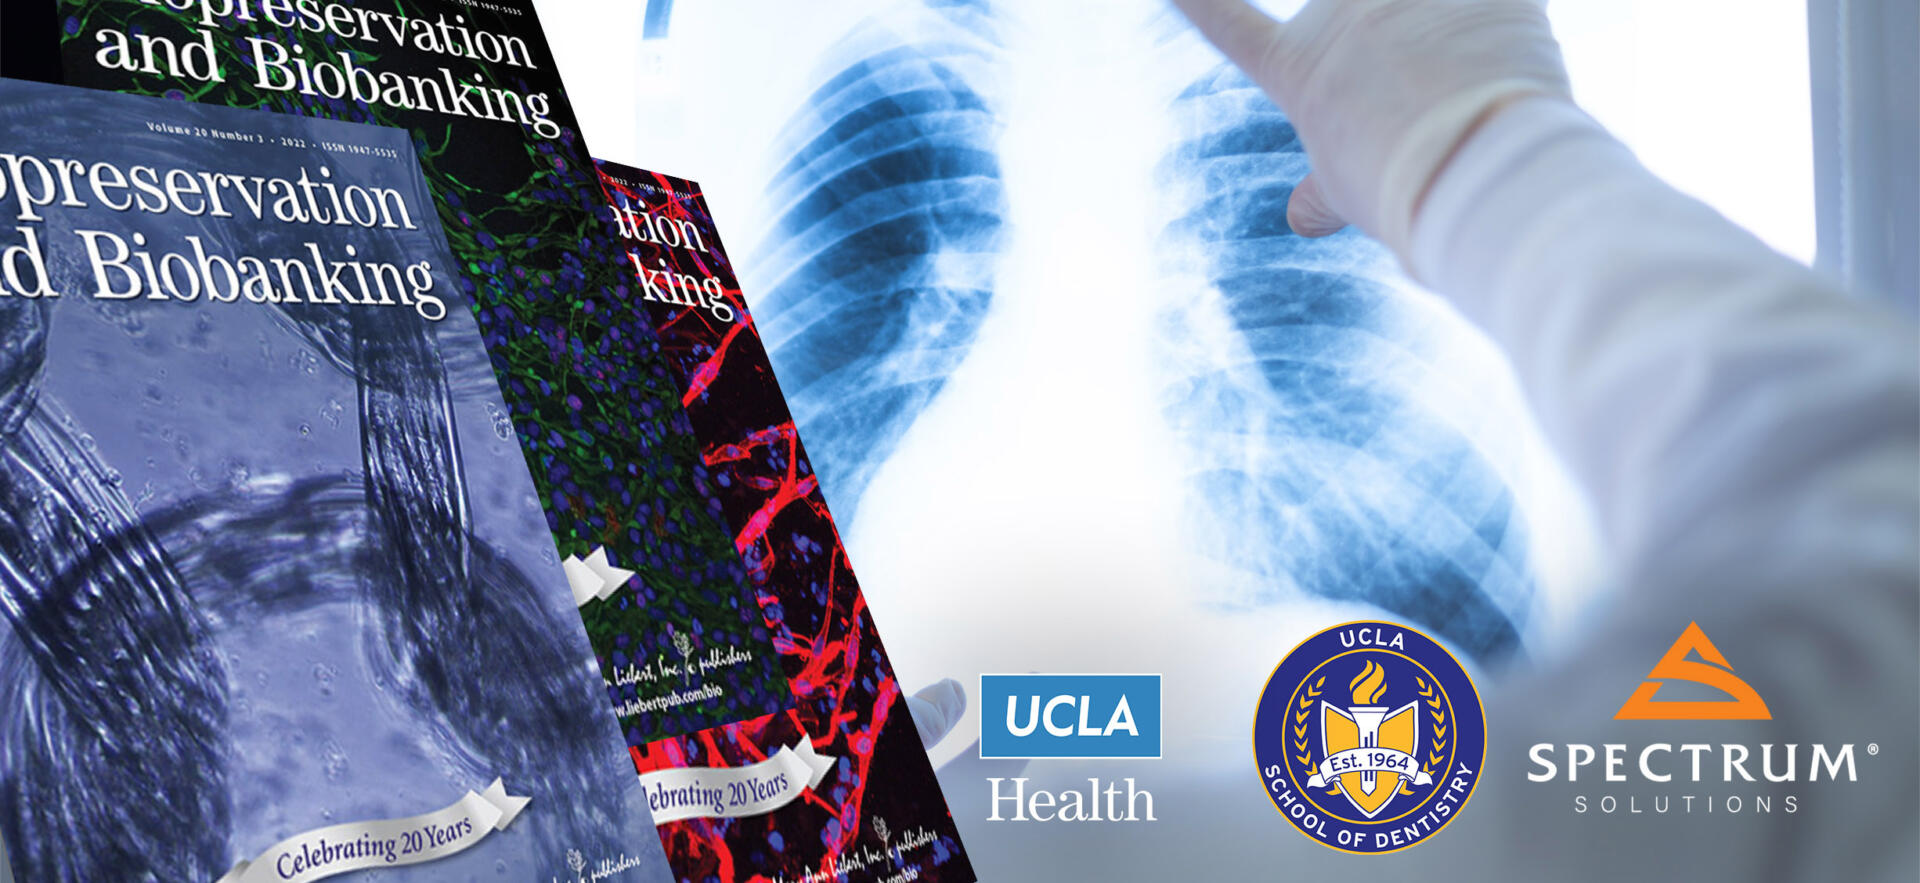 UCLA Health and Spectrum Solutions Published Research Saliva Liquid Biopsy